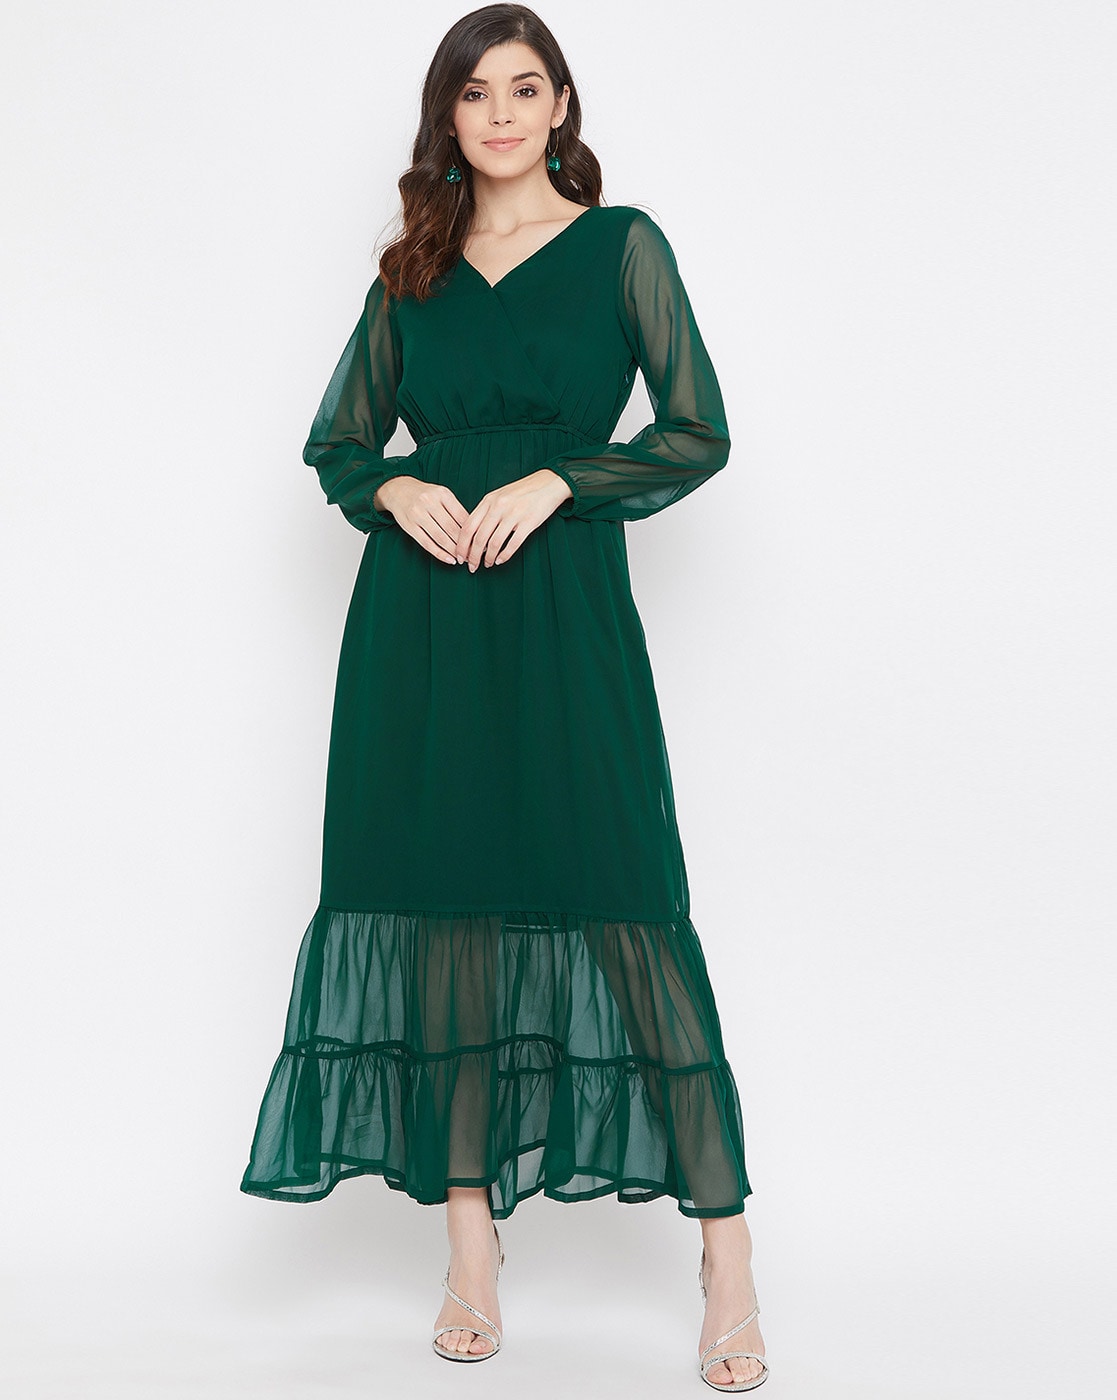 Dresses for Women by COLOR COCKTAIL ...